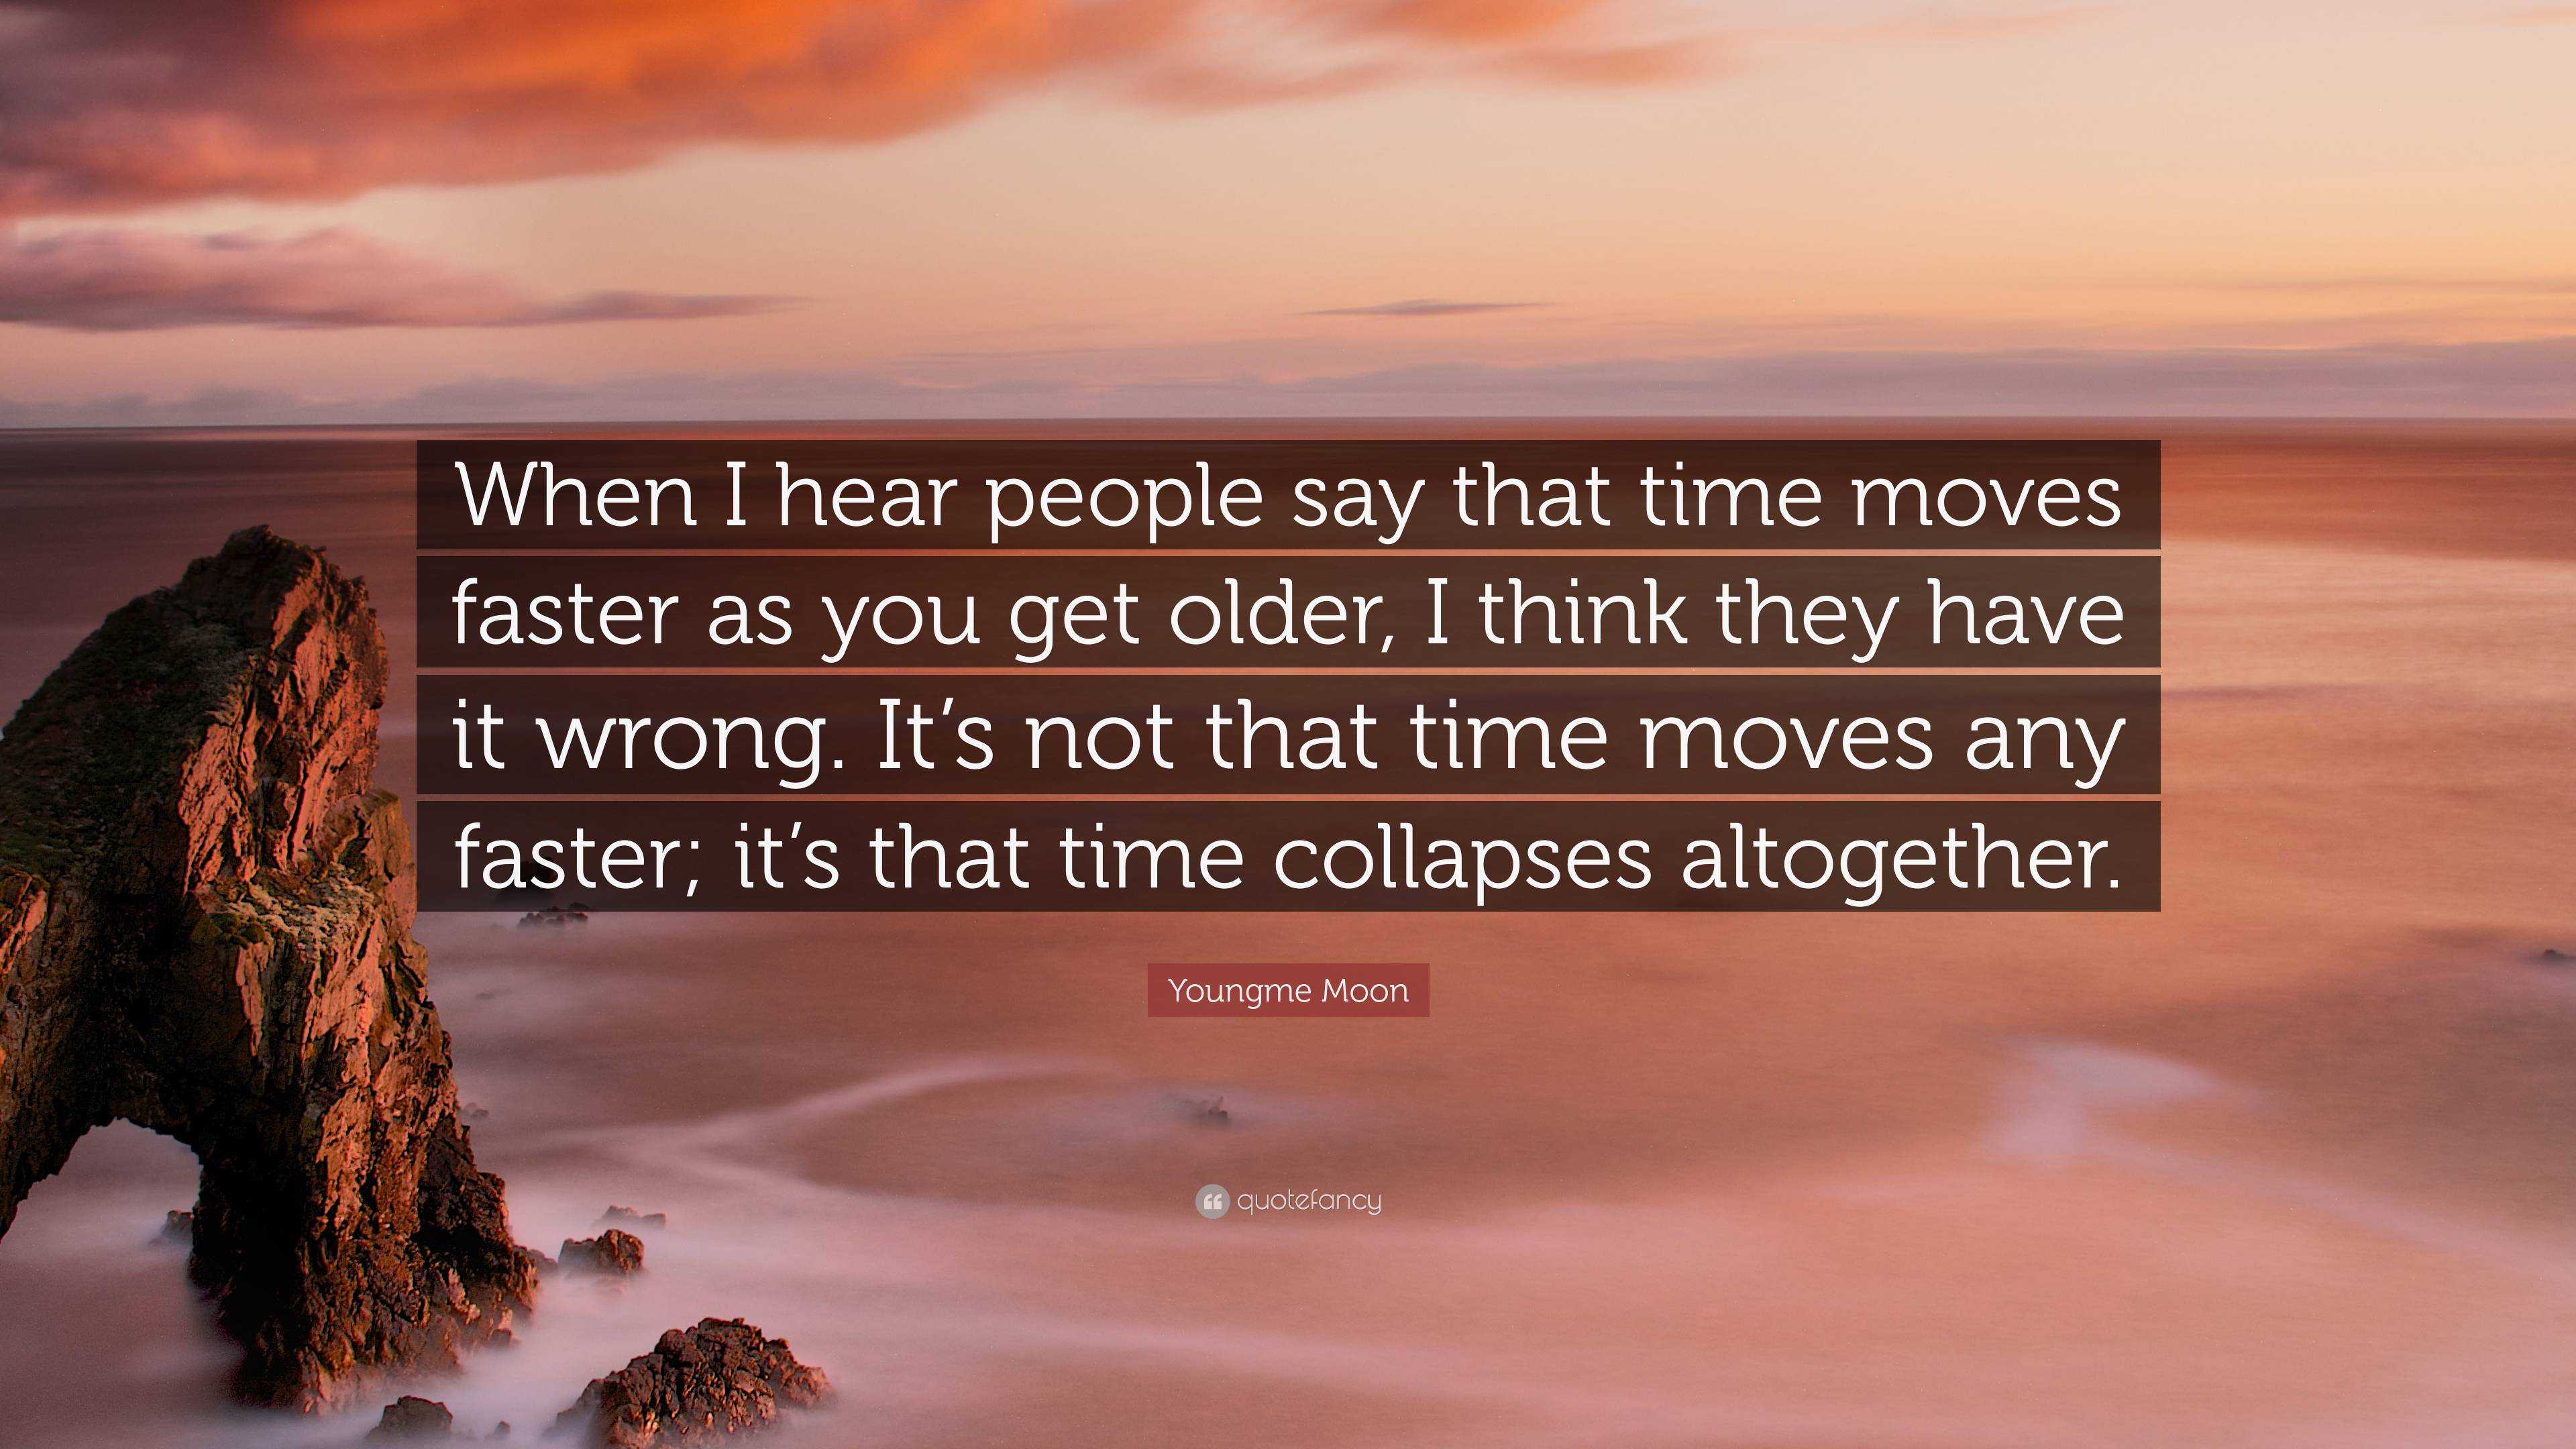 Youngme Moon Quote: “When I hear people say that time moves faster as ...